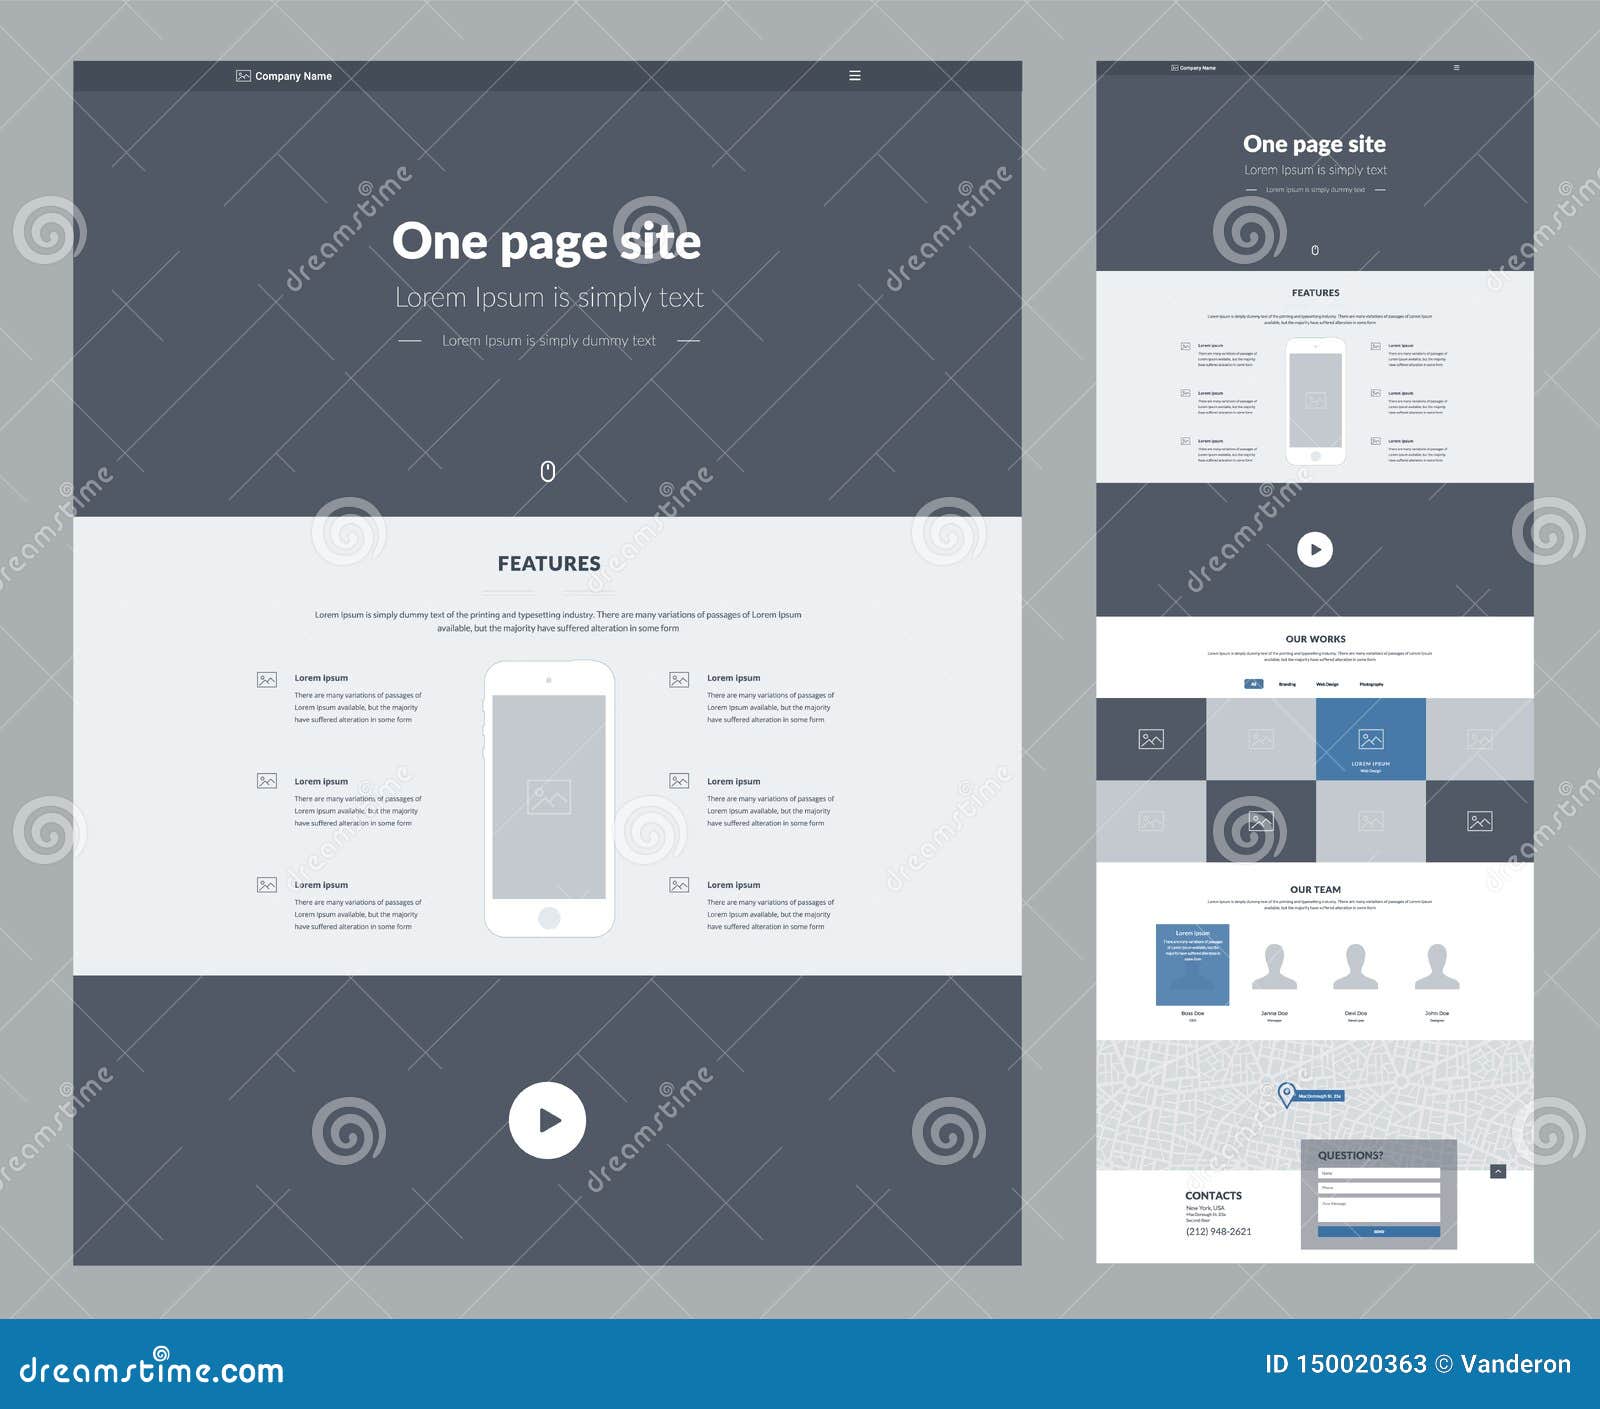 One Page Website Design Template for Business. Landing Page Intended For One Page Business Website Template